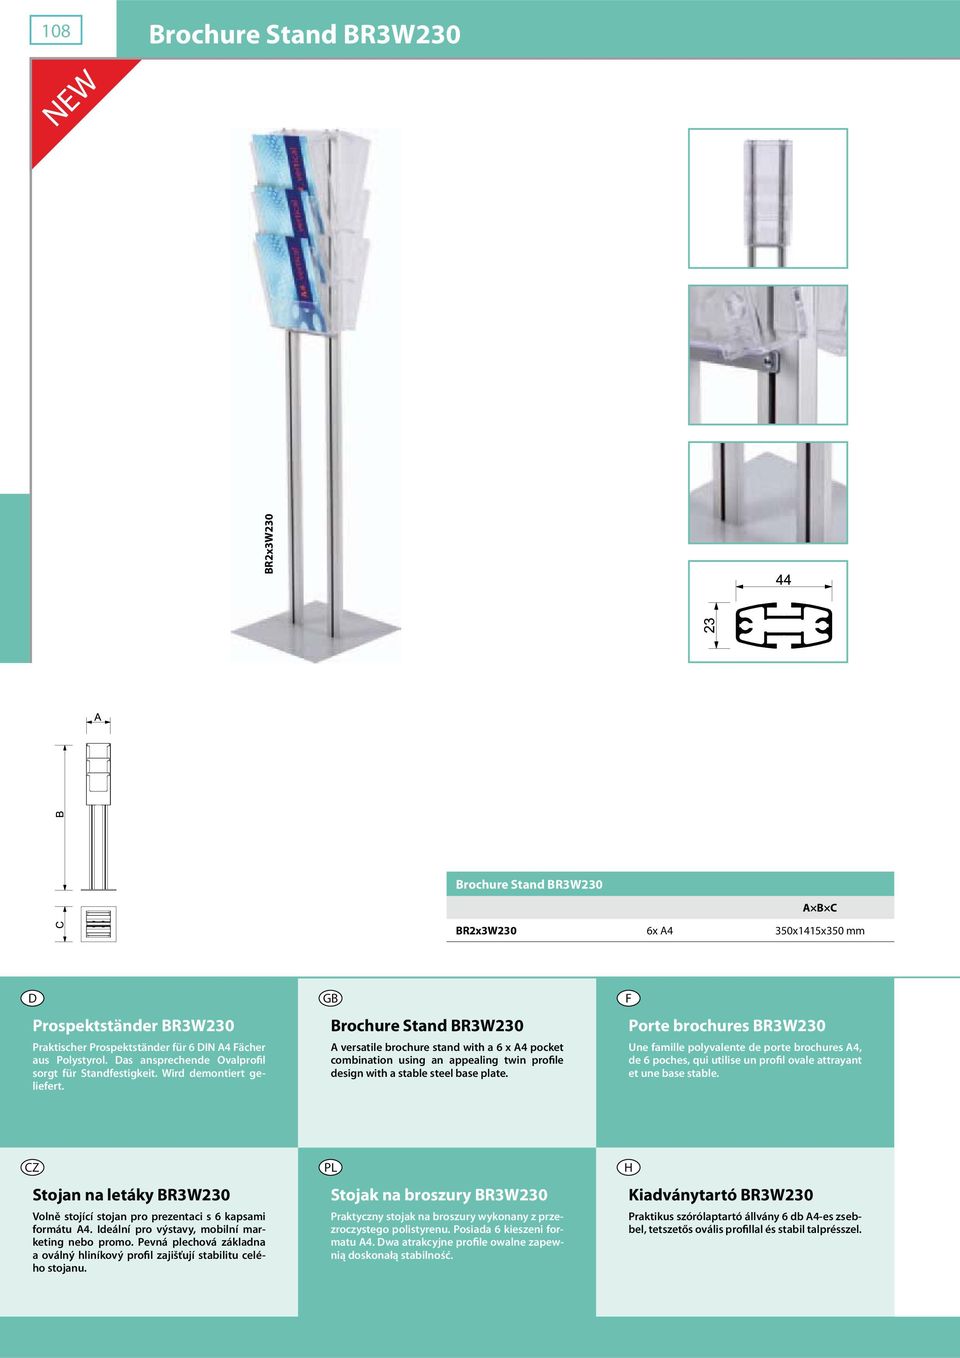 Brochure Stand BR3W230 A versatile brochure stand with a 6 x A4 pocket combination using an appealing twin profile design with a stable steel base plate.